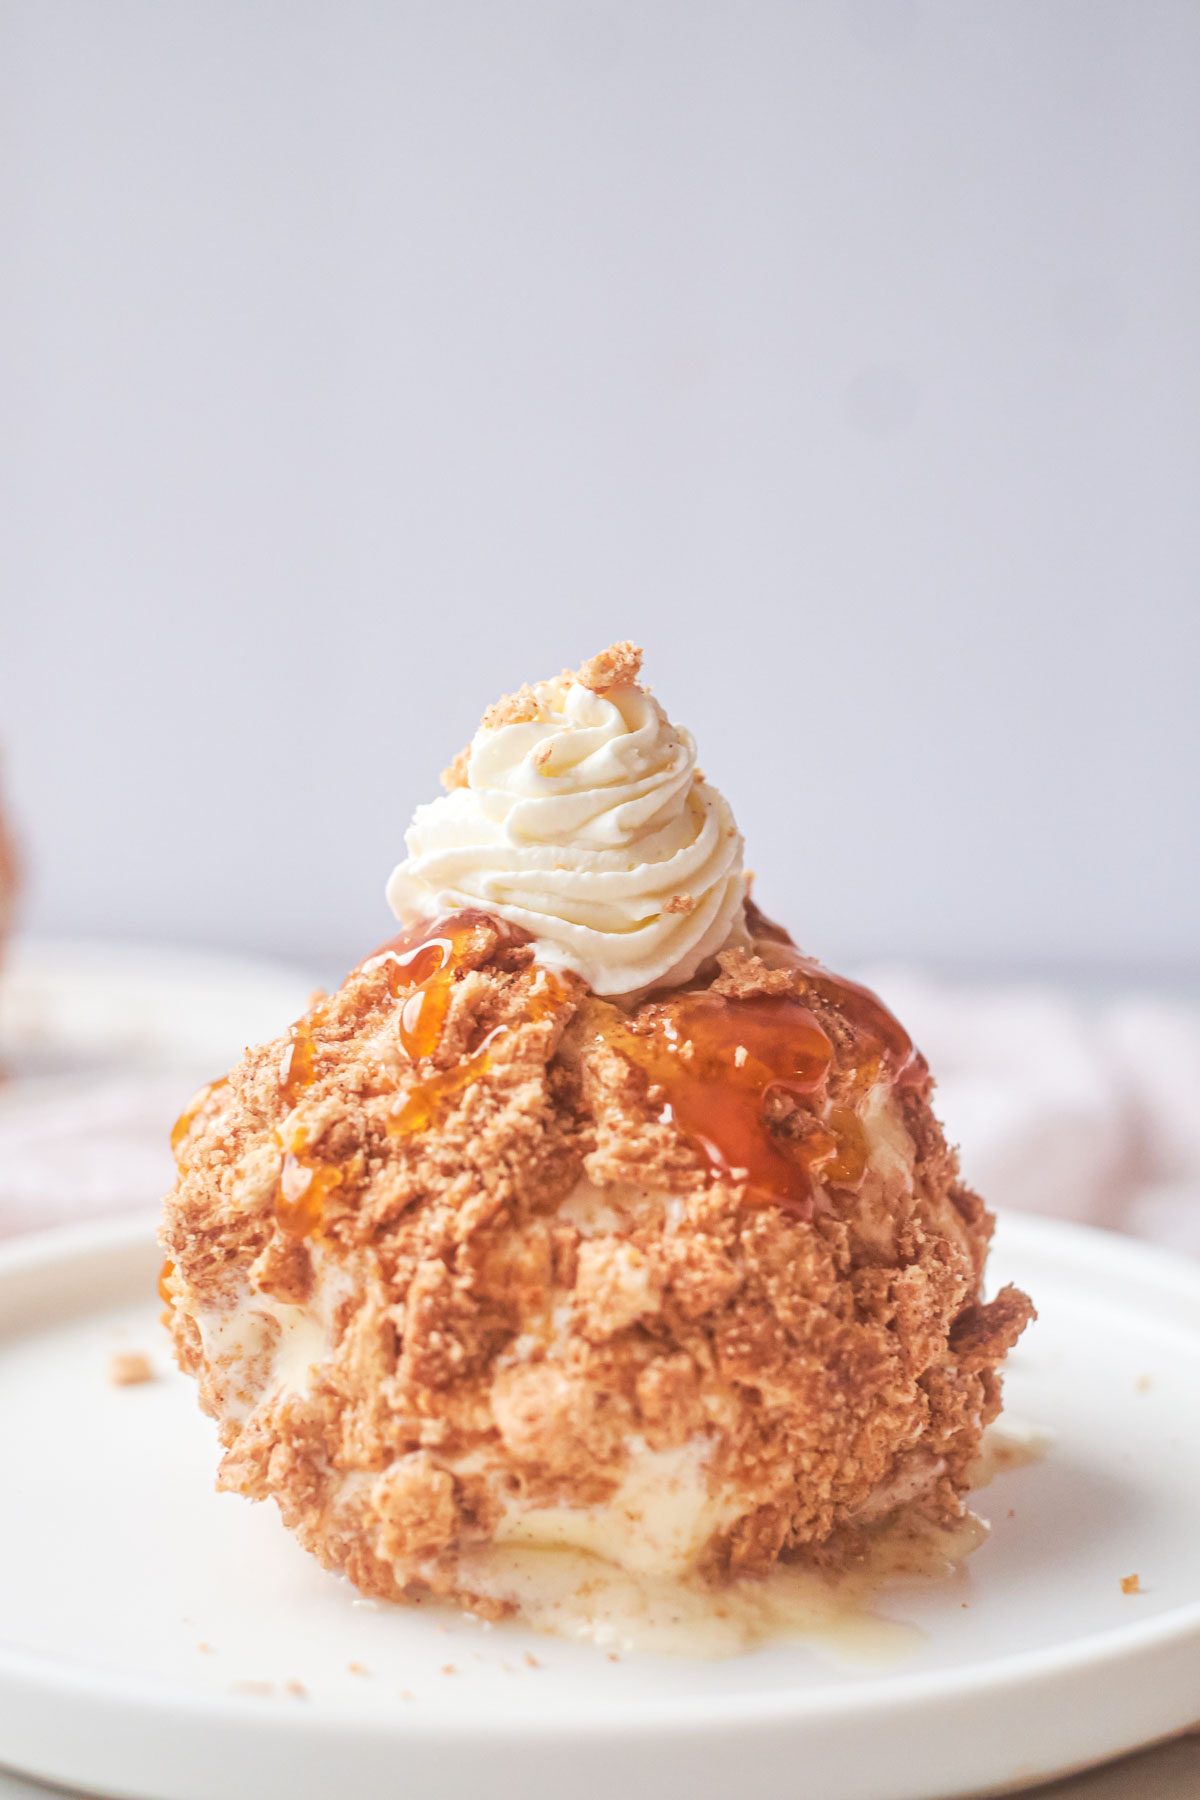 Fried Ice Cream Air Fryer - Recipes From A Pantry